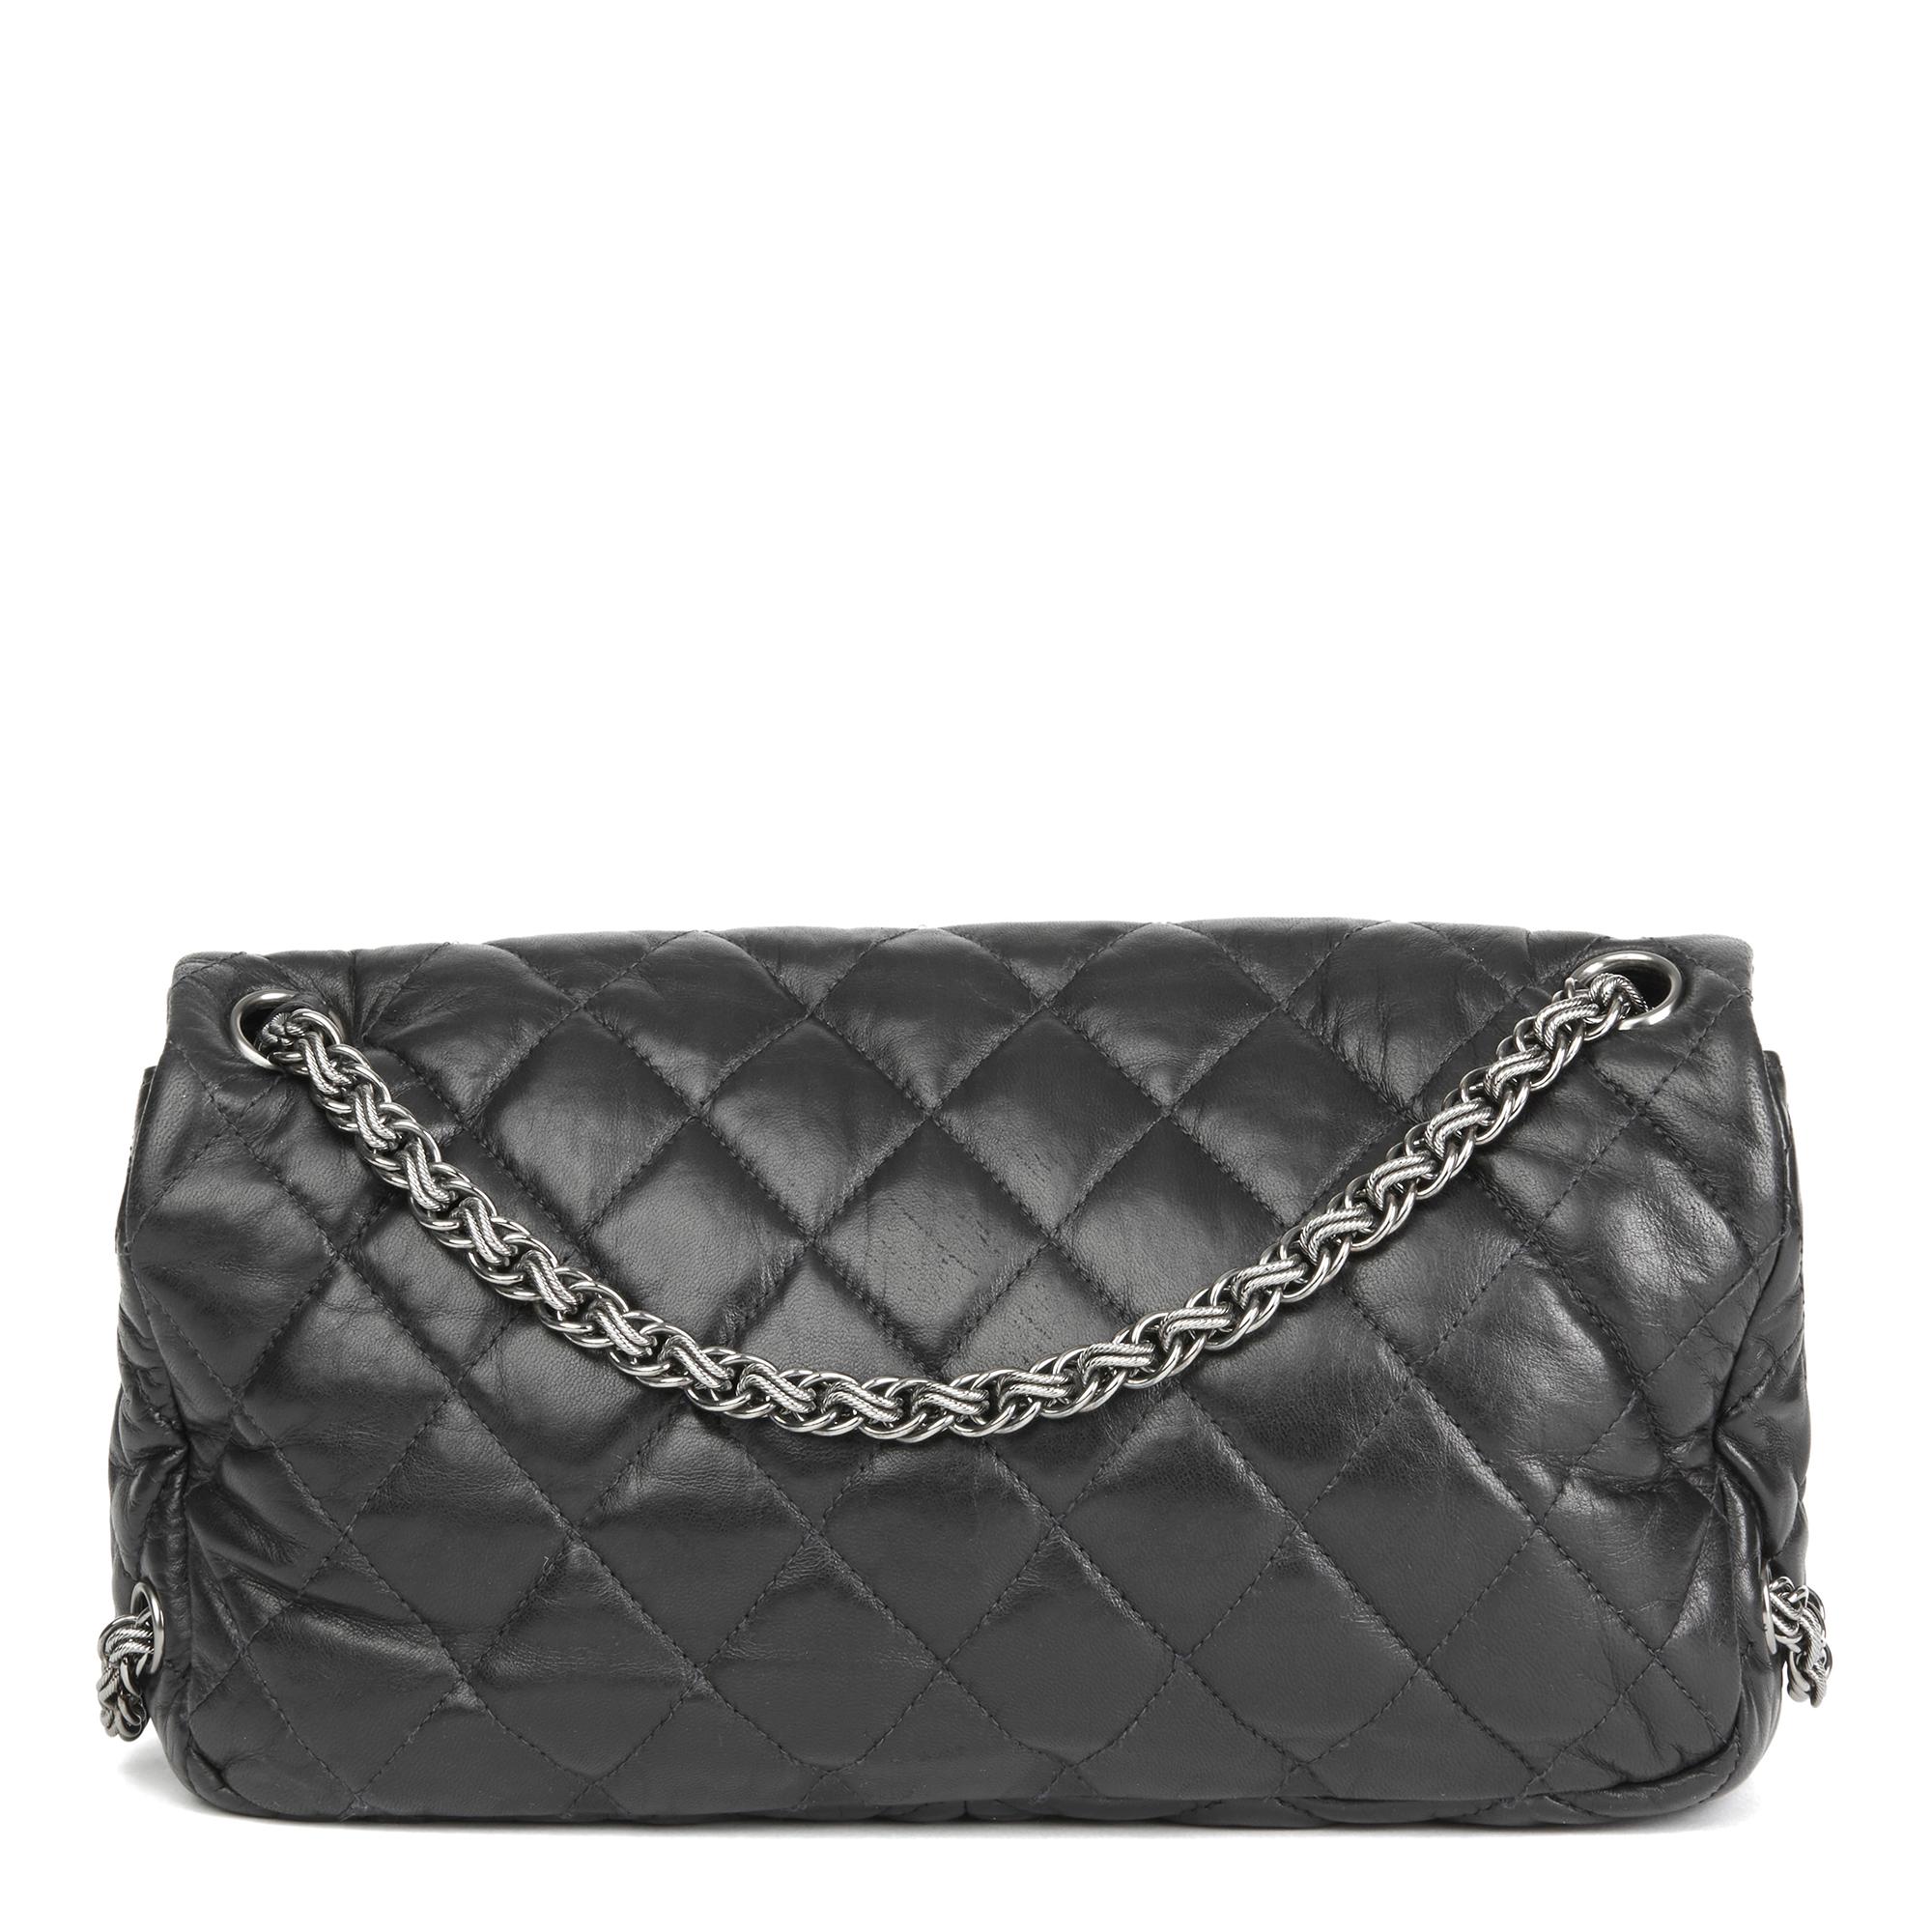 Women's 2009 Chanel Black Quilted Lambskin Leather Paris-Moscou Red Quare Flap Bag